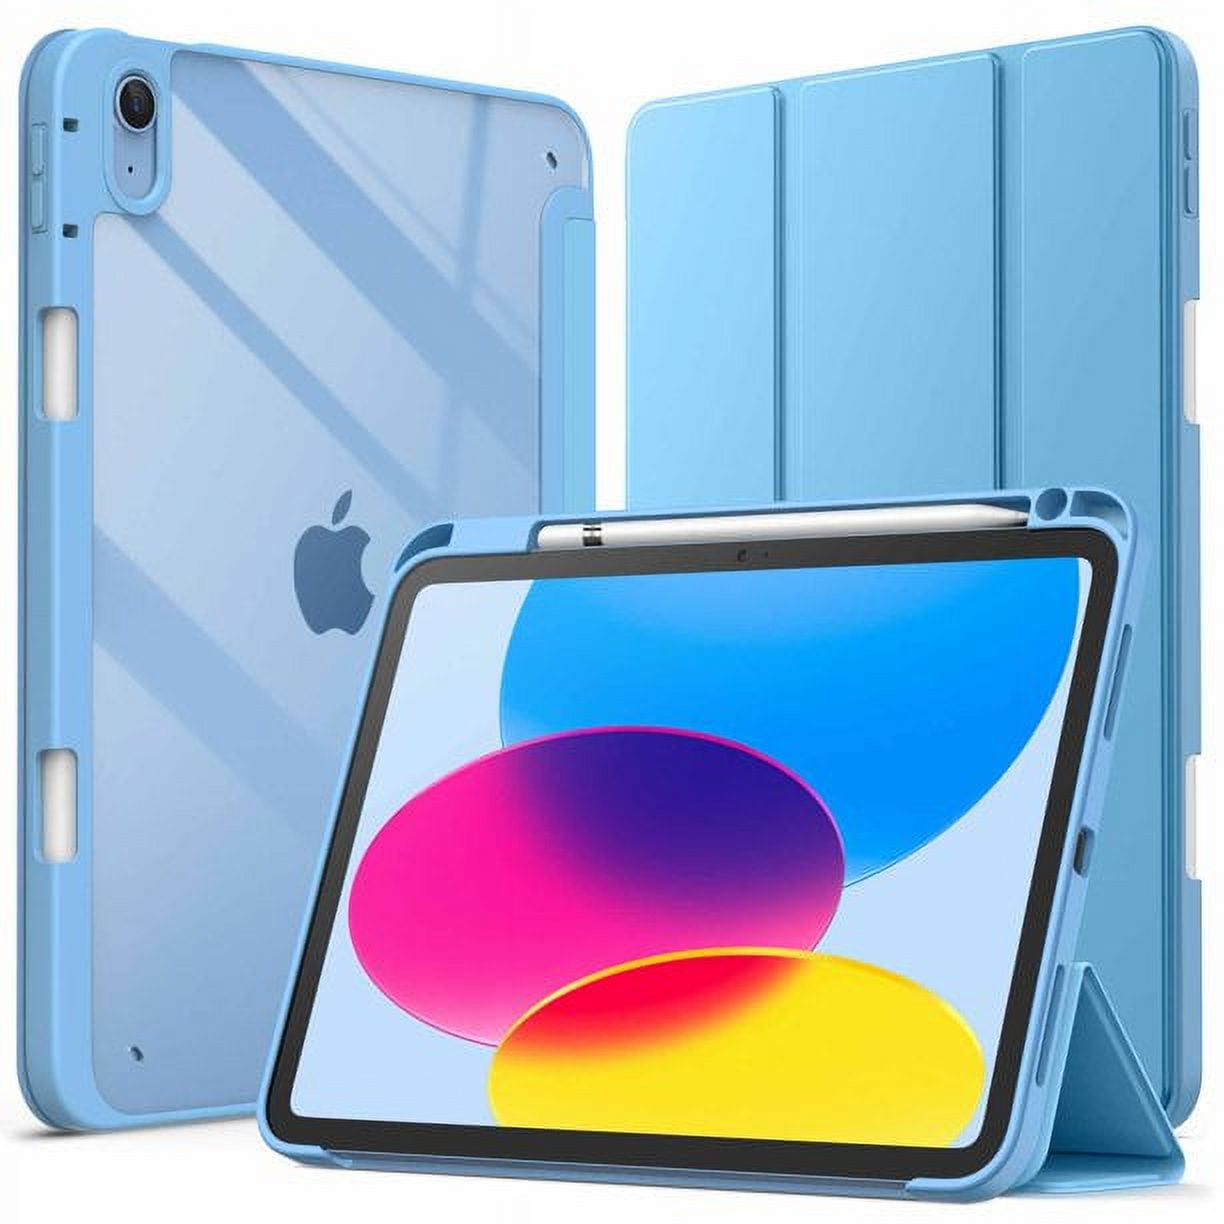 JETech Case for iPad Air 2 (2nd Generation), Smart Cover Auto Wake